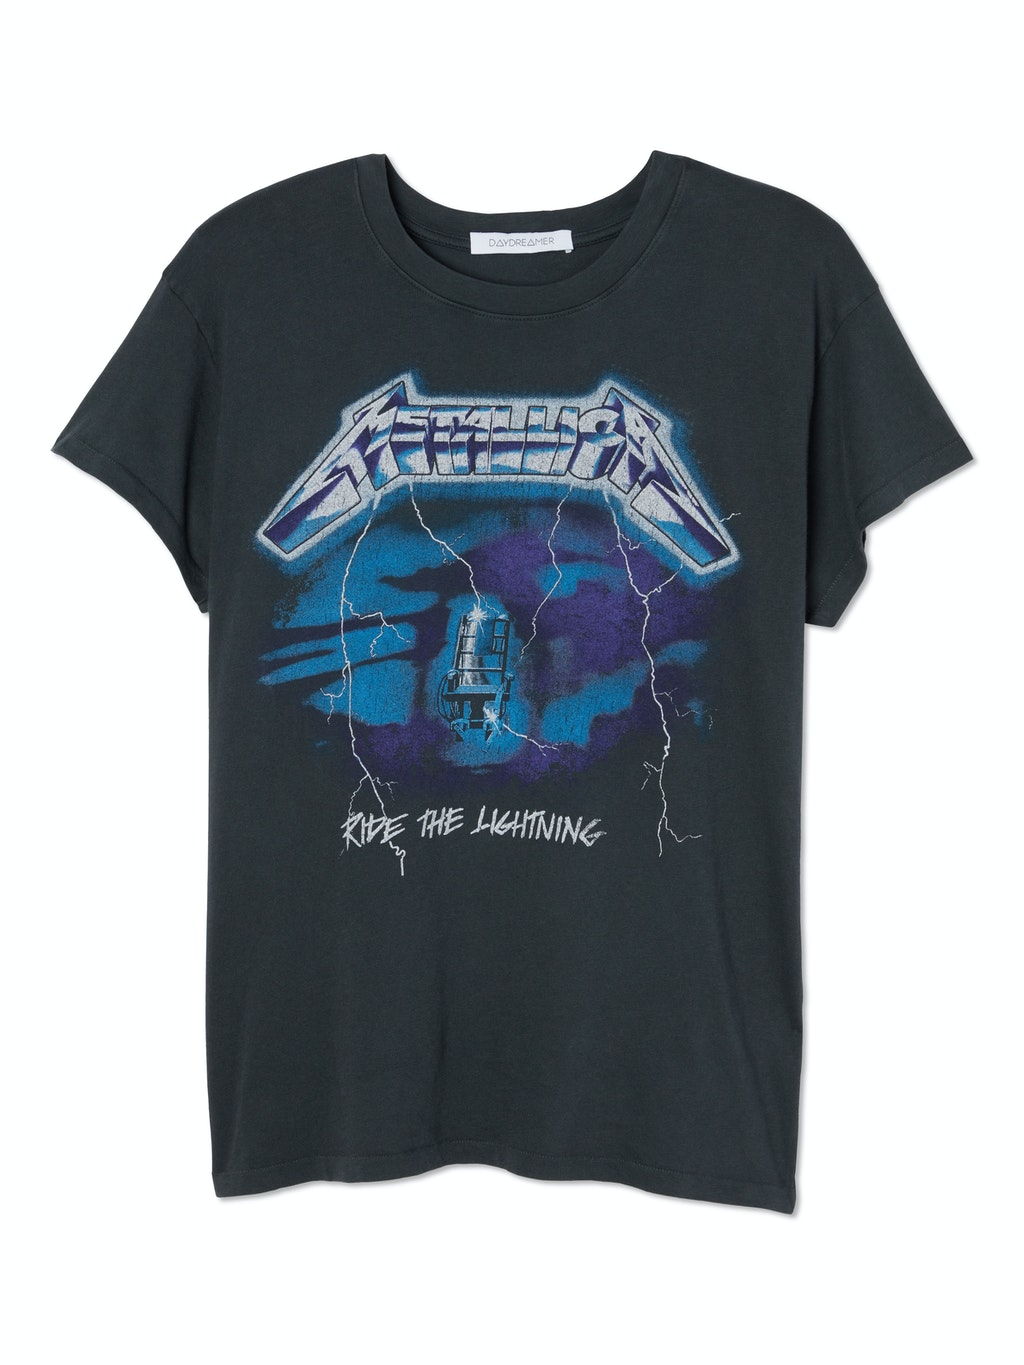 Ride the Lightning Tour Graphic T-Shirt